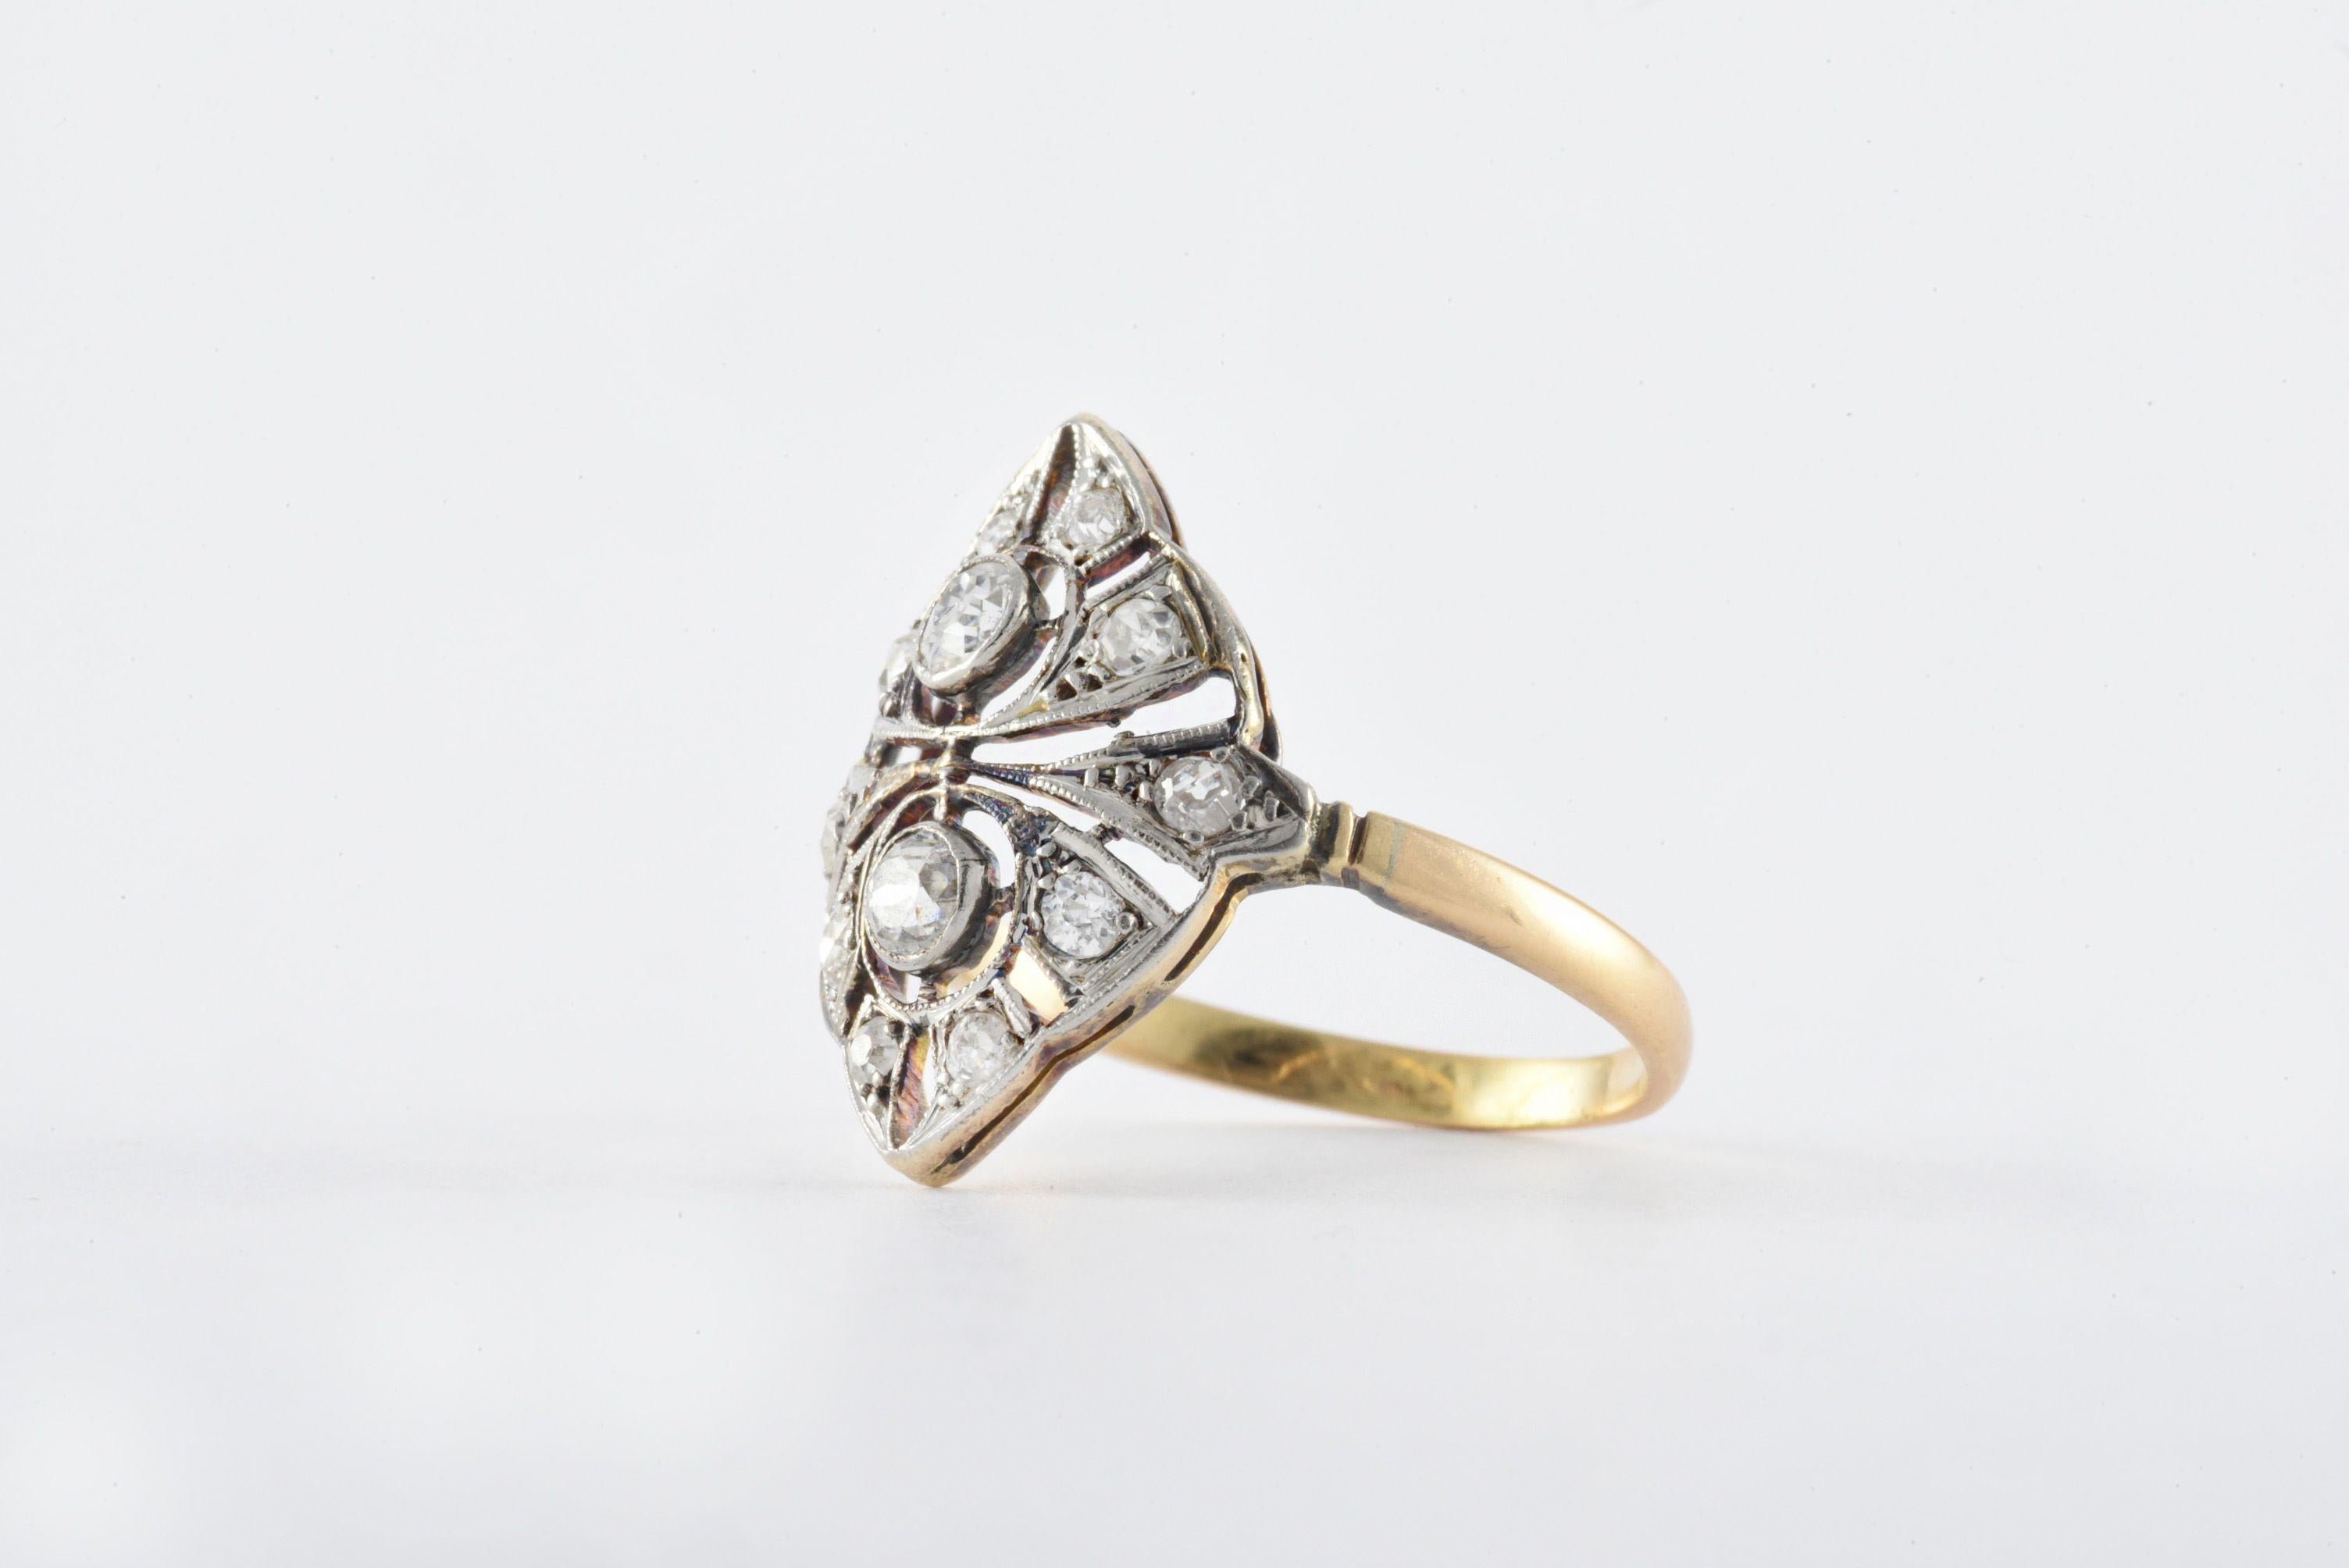 This antique dinner ring features two Old Mine cut diamonds surrounded by a mix of ten Old Mine cut and single cut diamonds set in an elaborate openwork platinum navette-shaped plaque atop an 18kt yellow gold band. The total diamond weight is